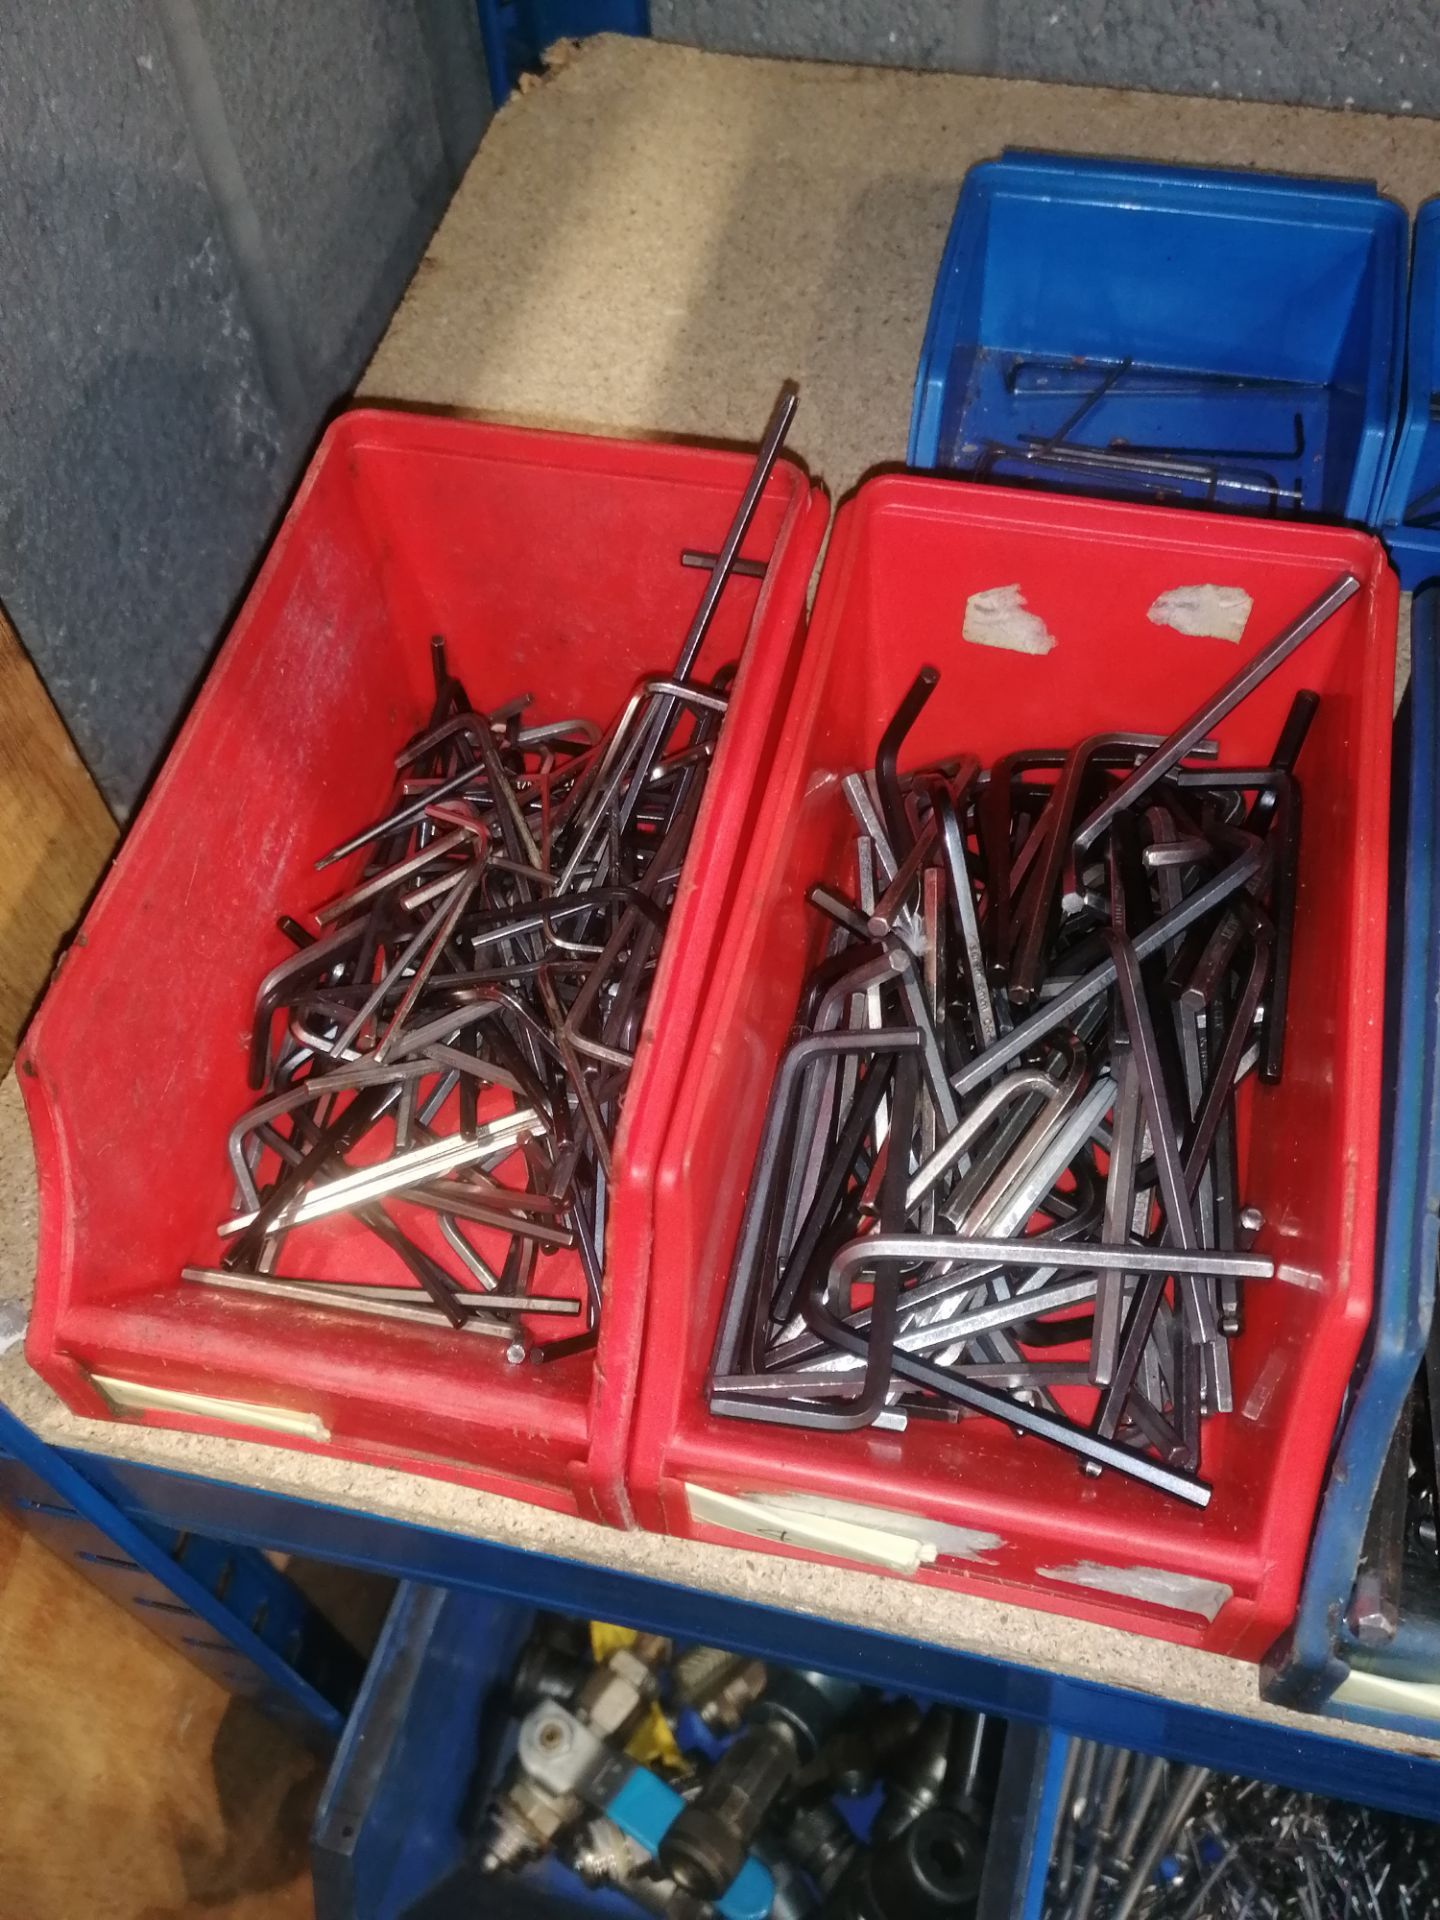 Various Allen Keys & Torque Keys (Please Note: Plastic Container Boxes Are Not Included) - Image 6 of 11